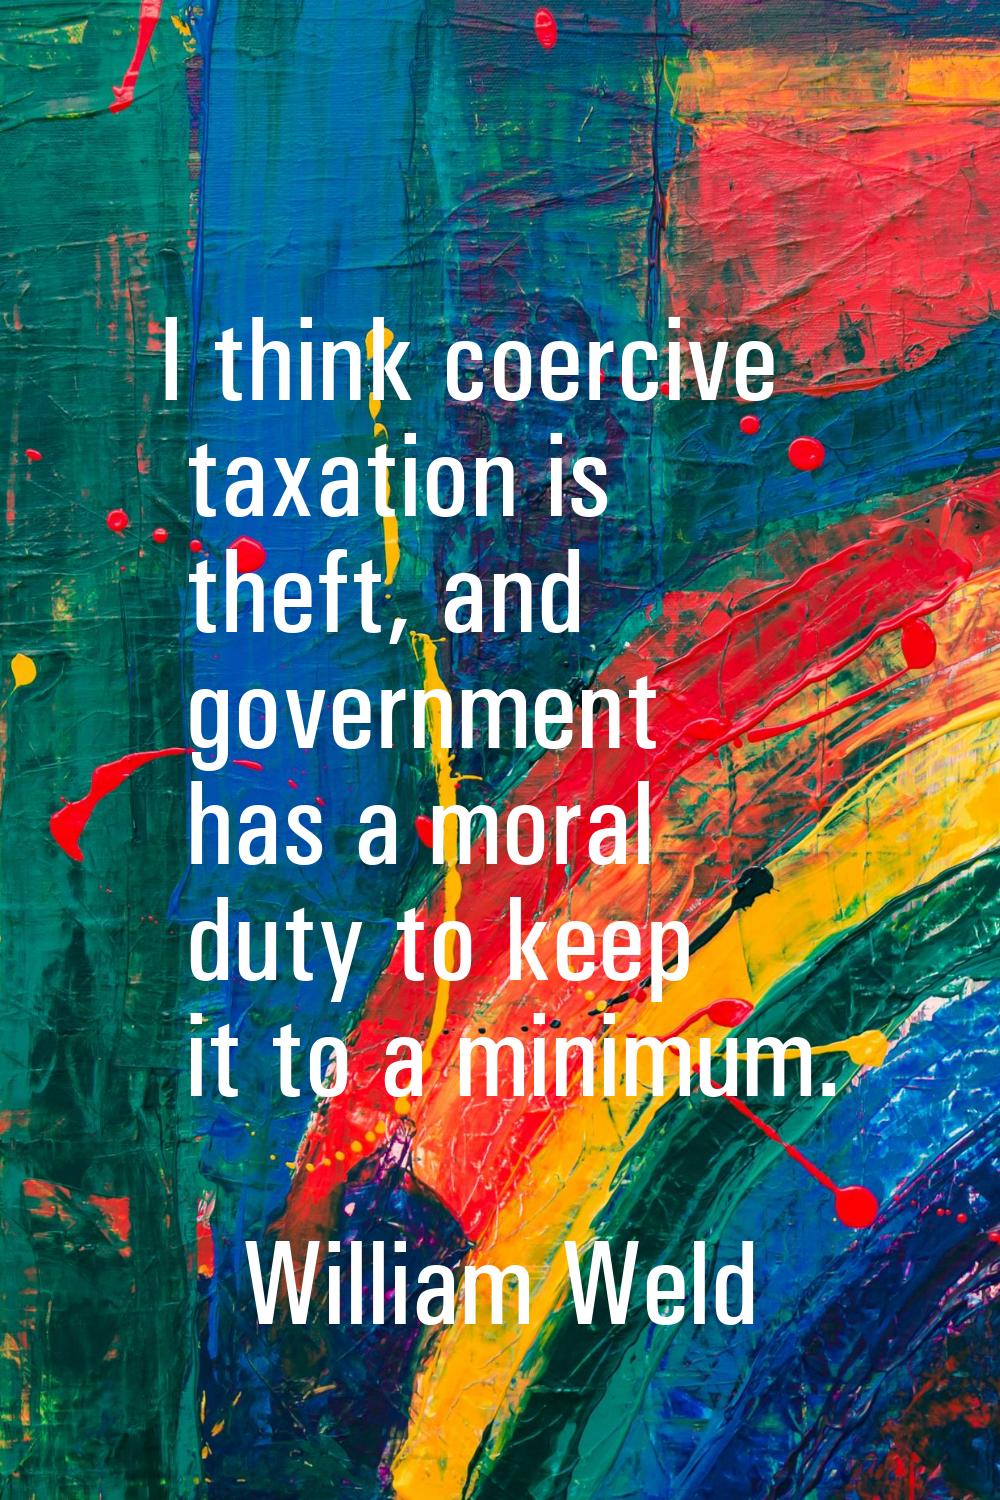 I think coercive taxation is theft, and government has a moral duty to keep it to a minimum.